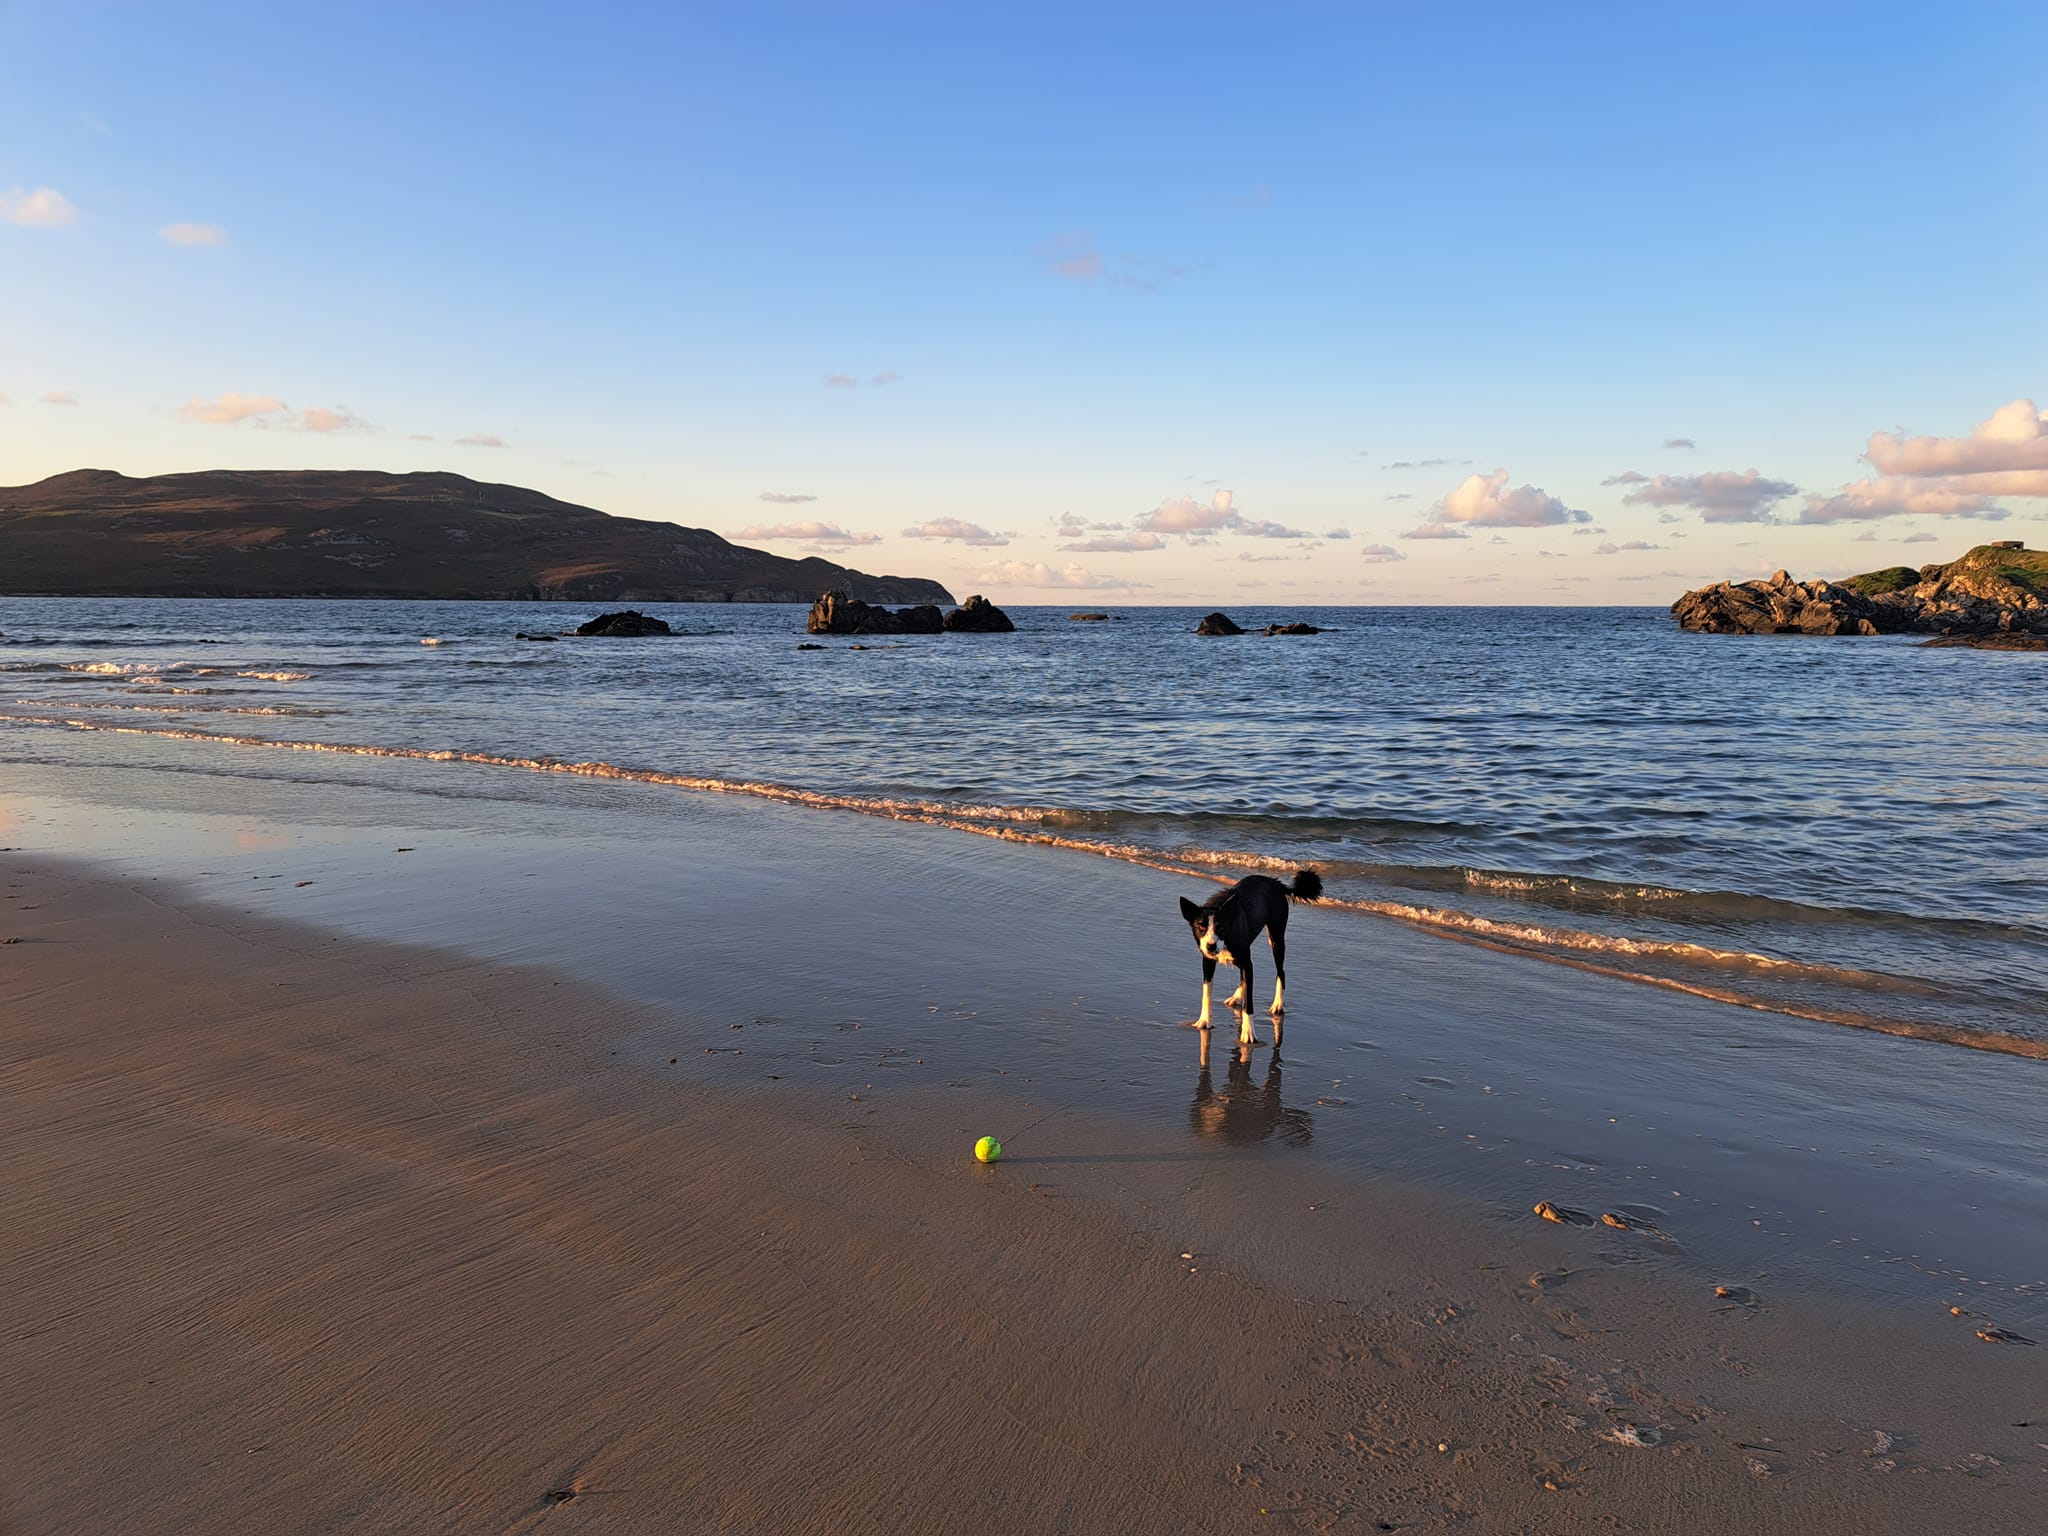 Dog standing on the beach waiting for a ball to be thrown